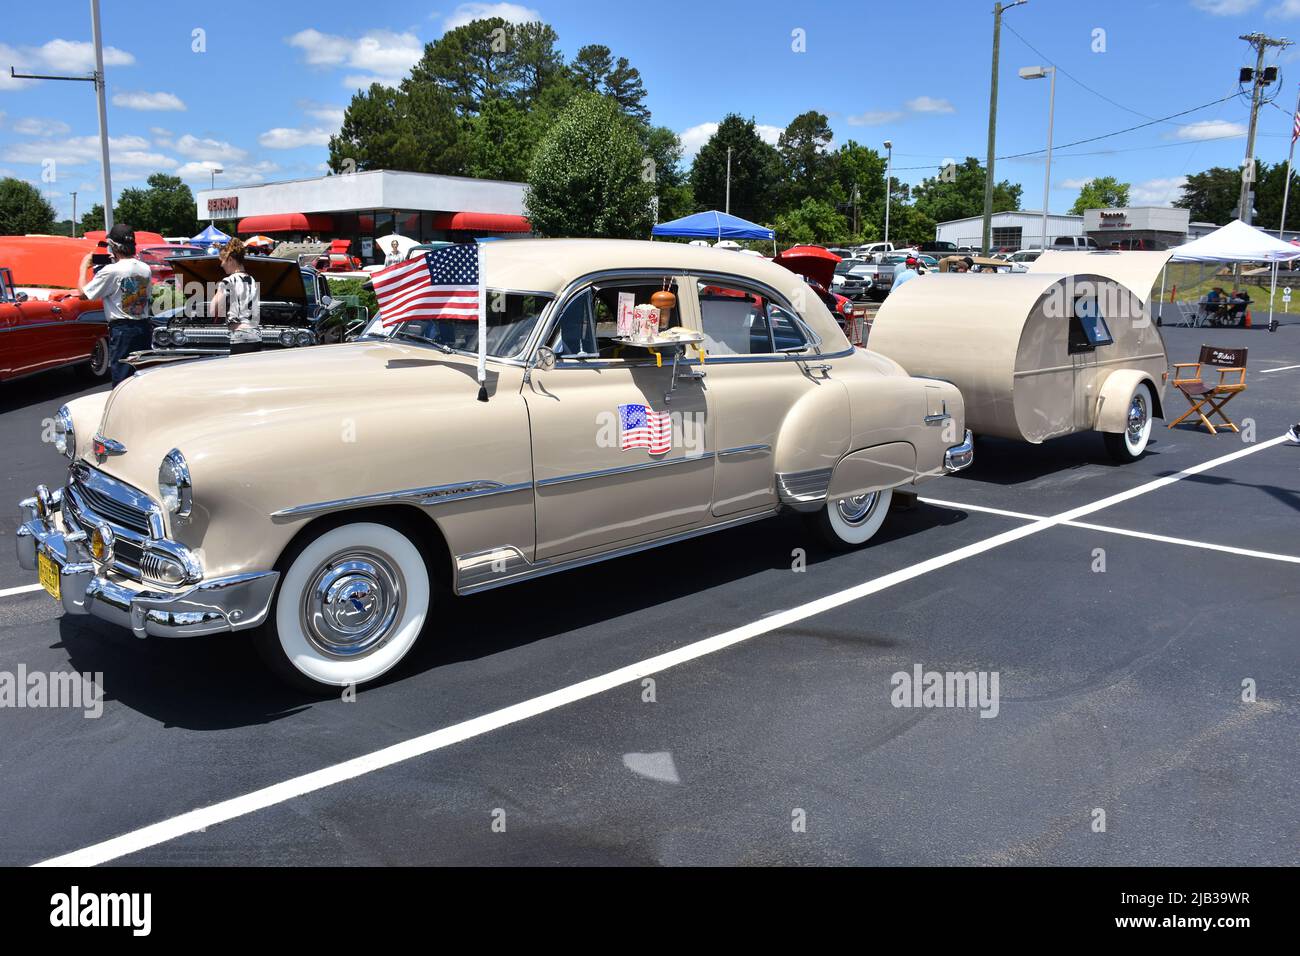 A 1951 Chevrolet Deluxe pulling a 1948 Tear Drop Camper on display at a car show. Stock Photo